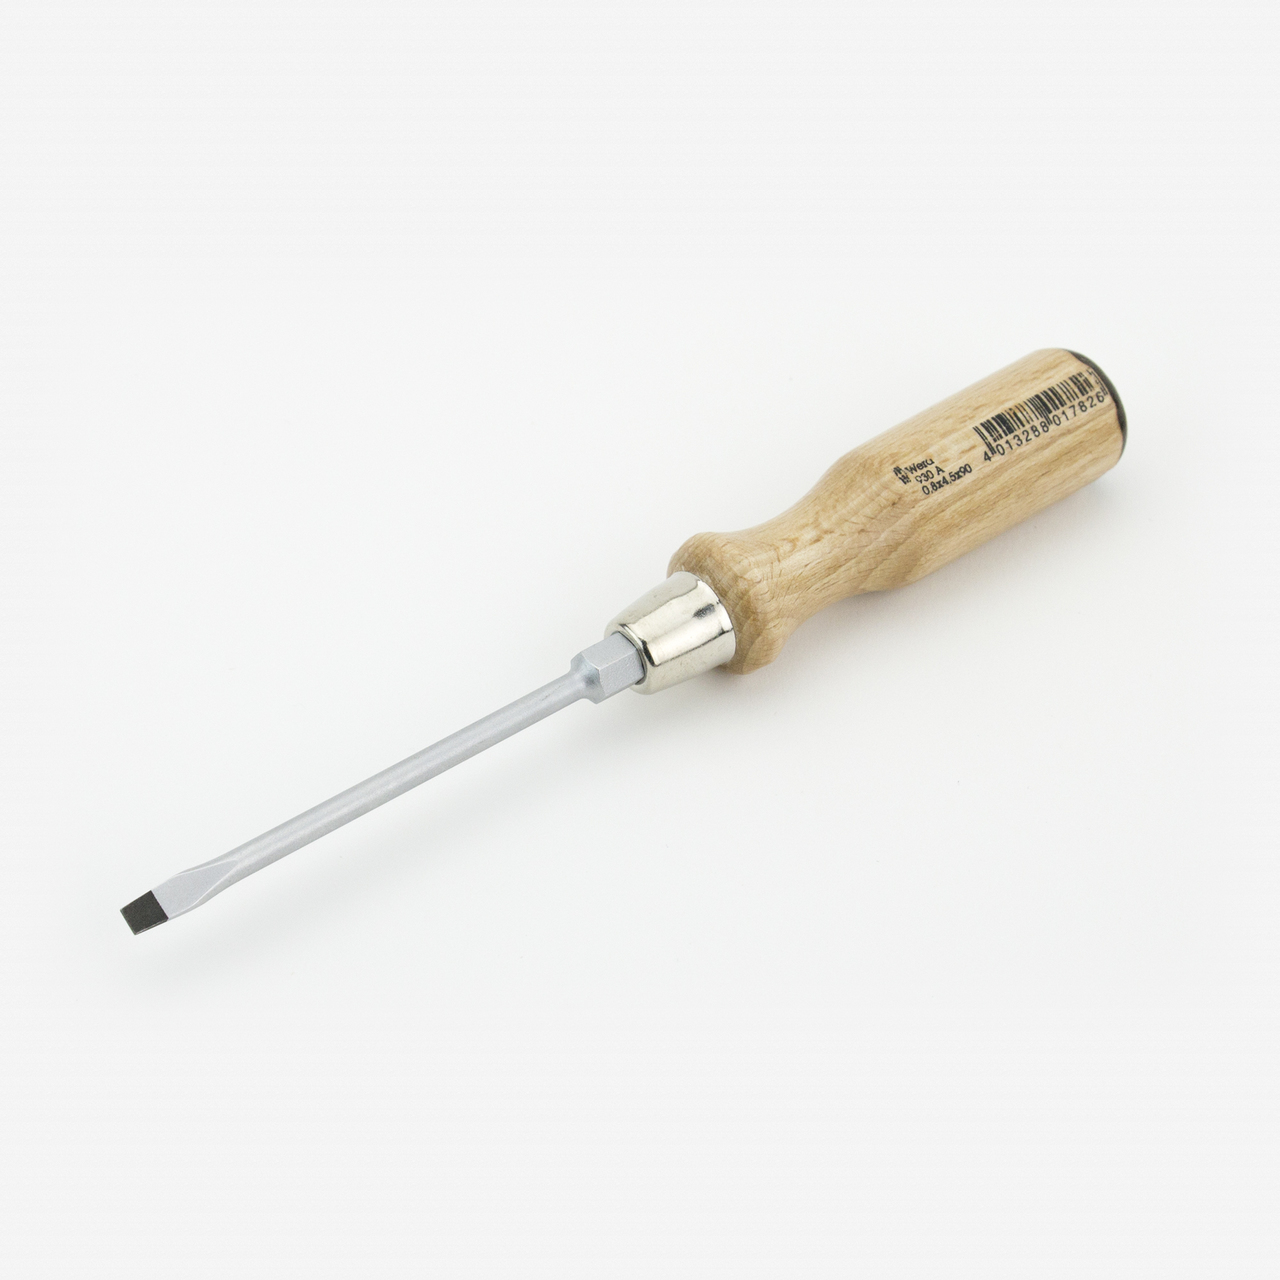 Wera 018010 4.5 x 90mm Wooden Handle Slotted Screwdriver - image 1 of 3